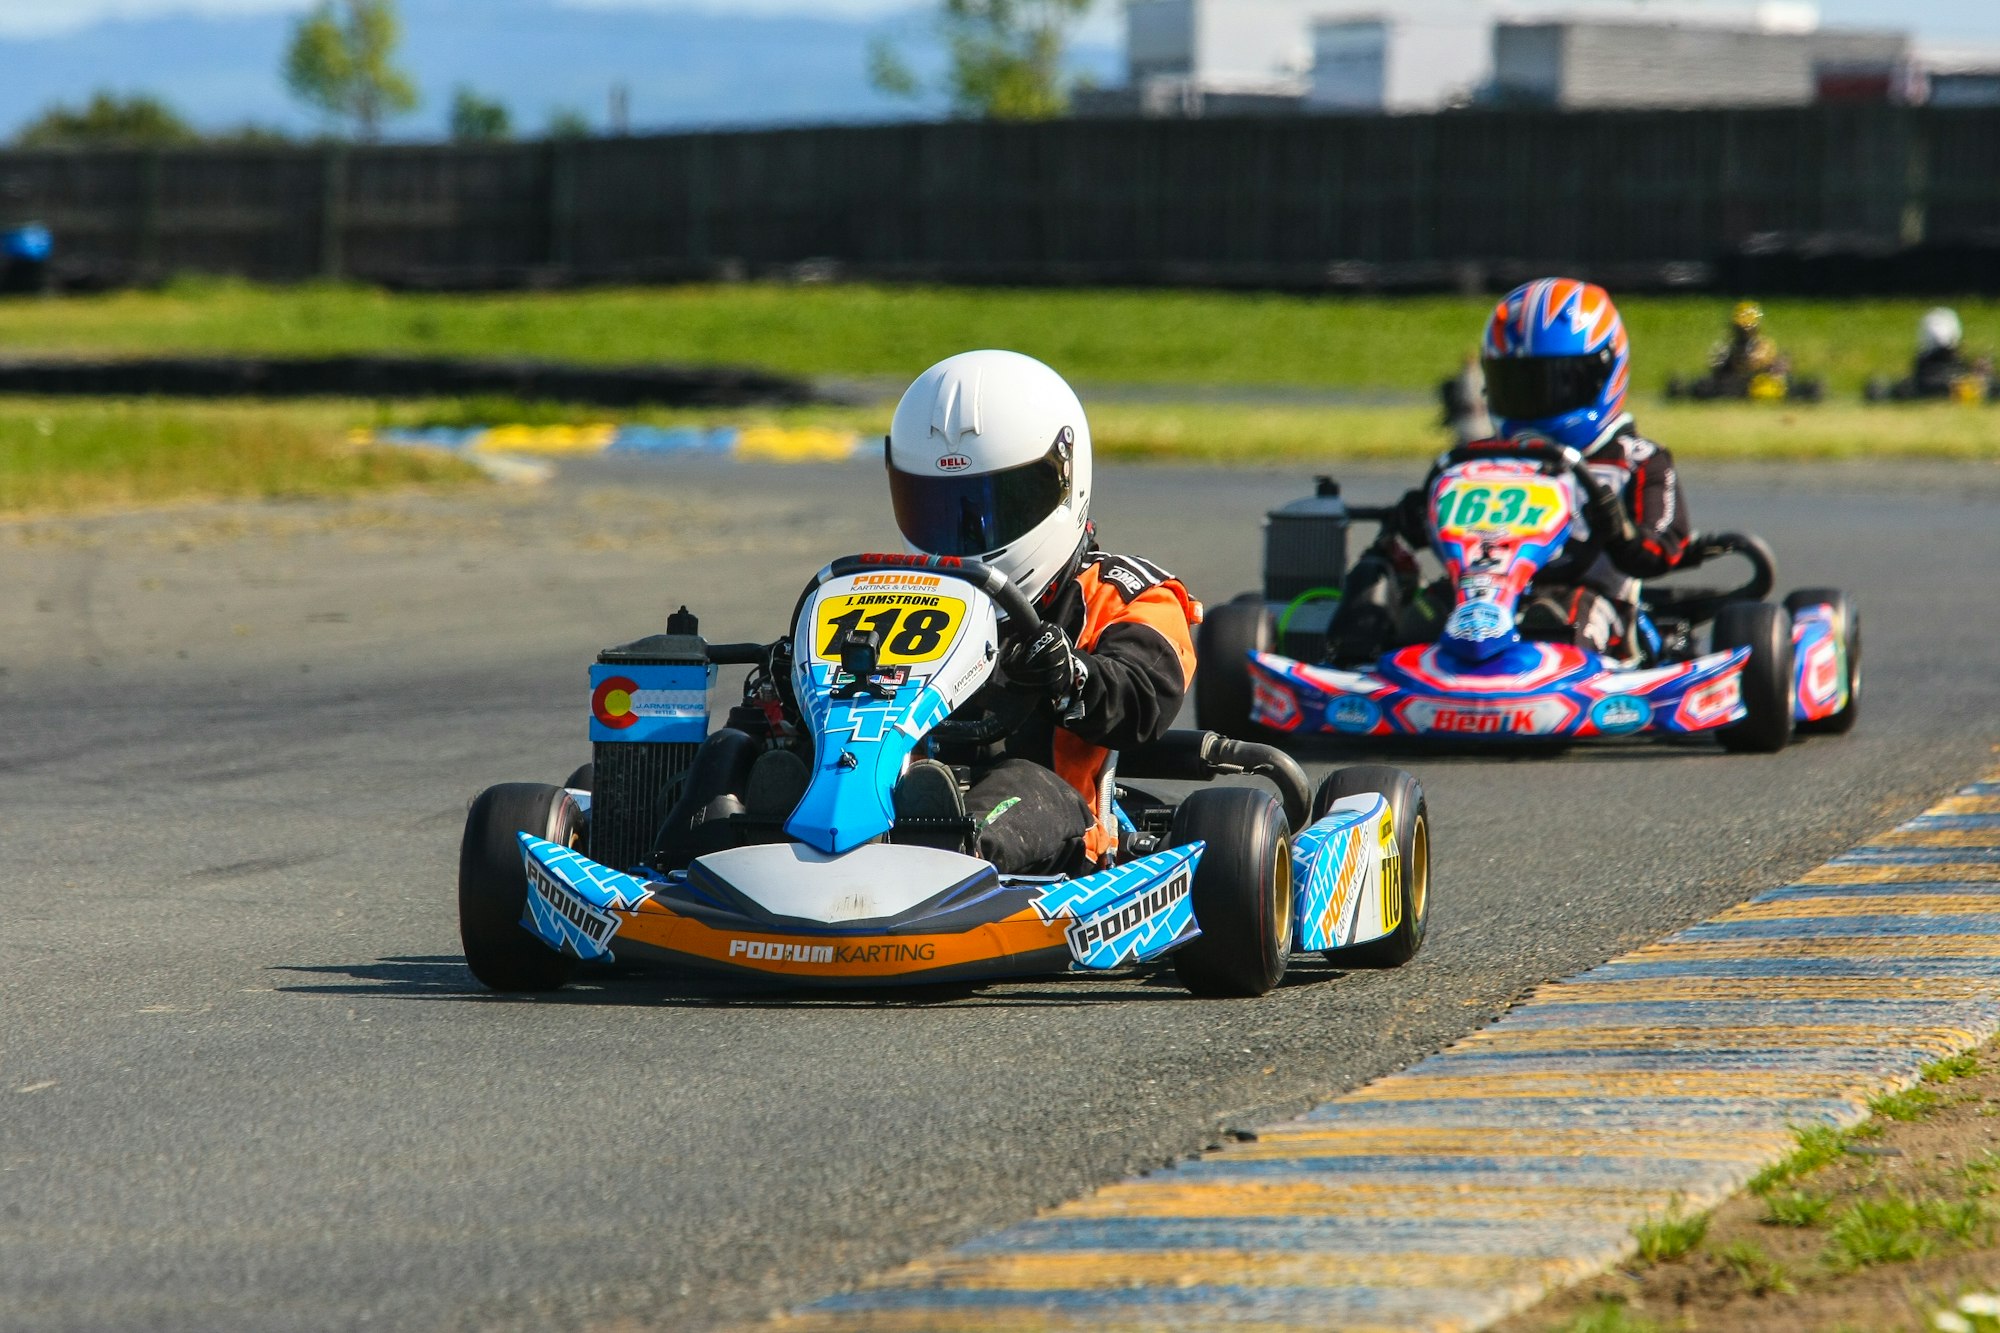 This is my son finishing the last lap of a 6 race, three city racing series.  He finished first through a combination of effort, tenacity and results.